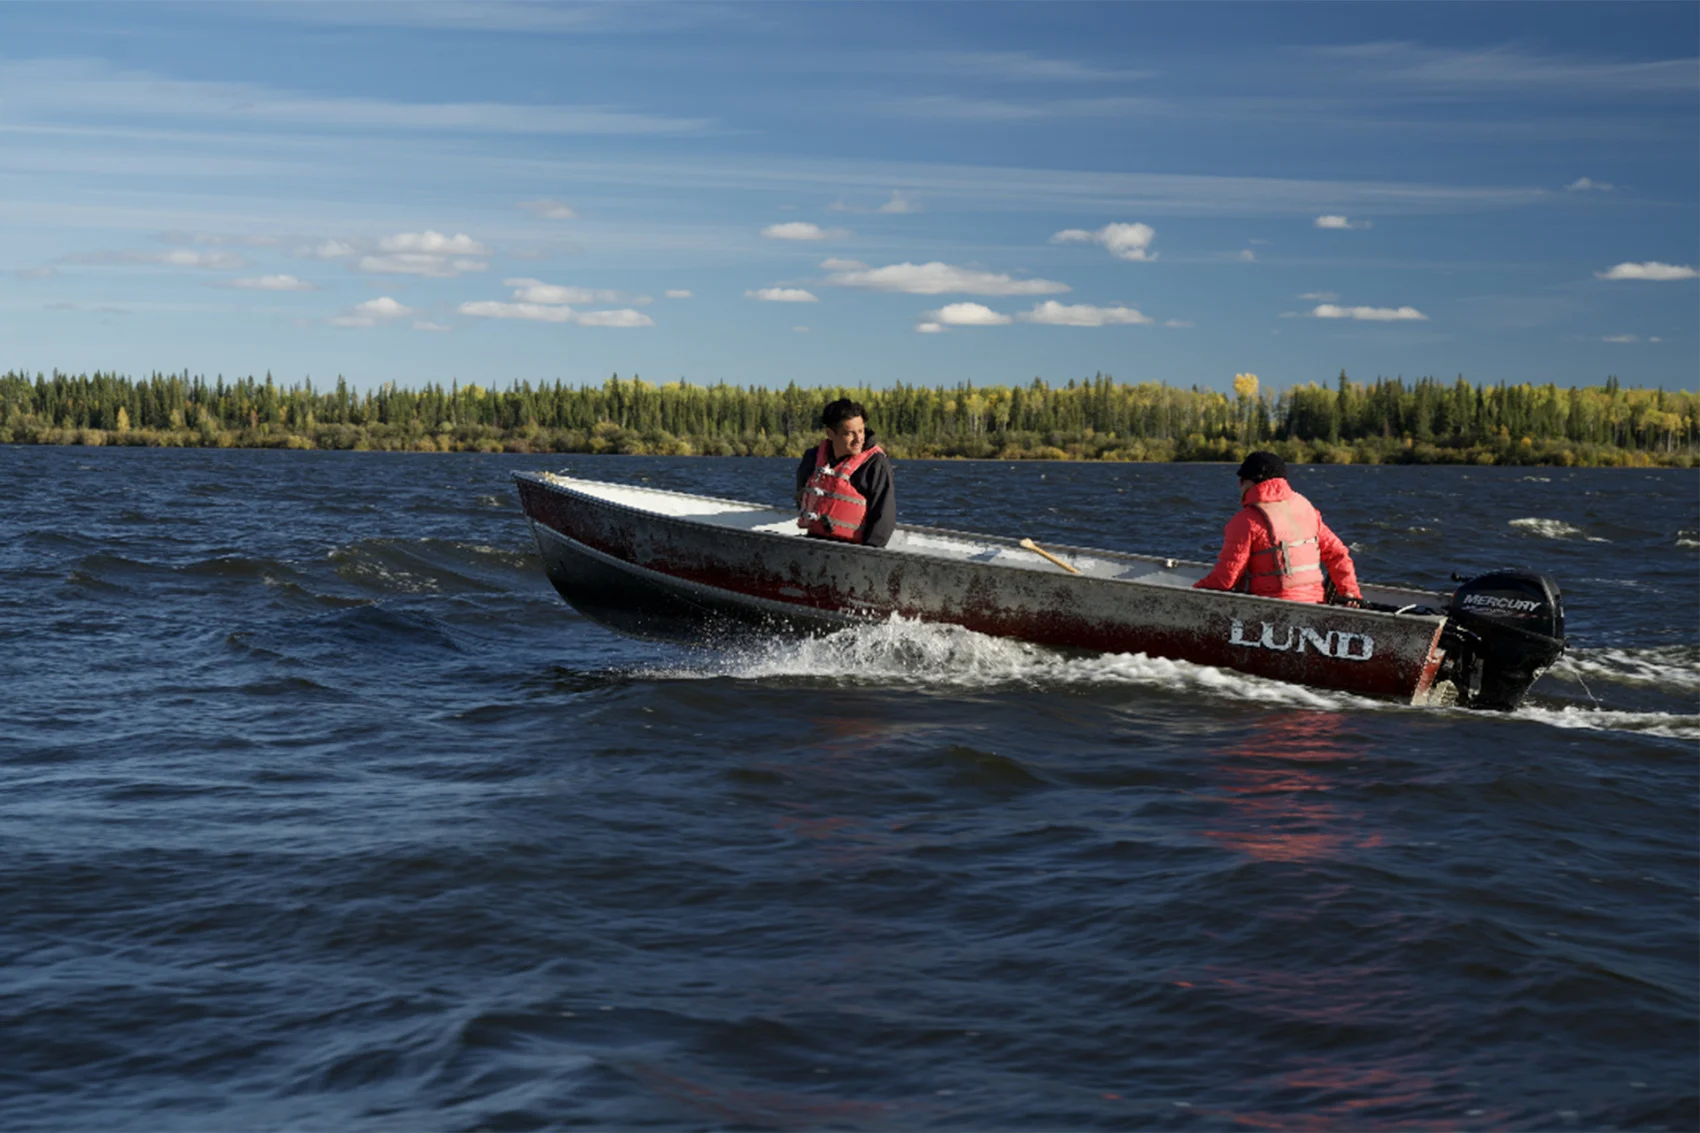 Matt Munson, a technician with the Dene Tha’ First Nation, out on Mbehcho (Bistcho) Lake. The lake is in the far reaches of northern Alberta, making it a remote reprieve for wildlife. Photo: Jeremy Williams / River Voices productions